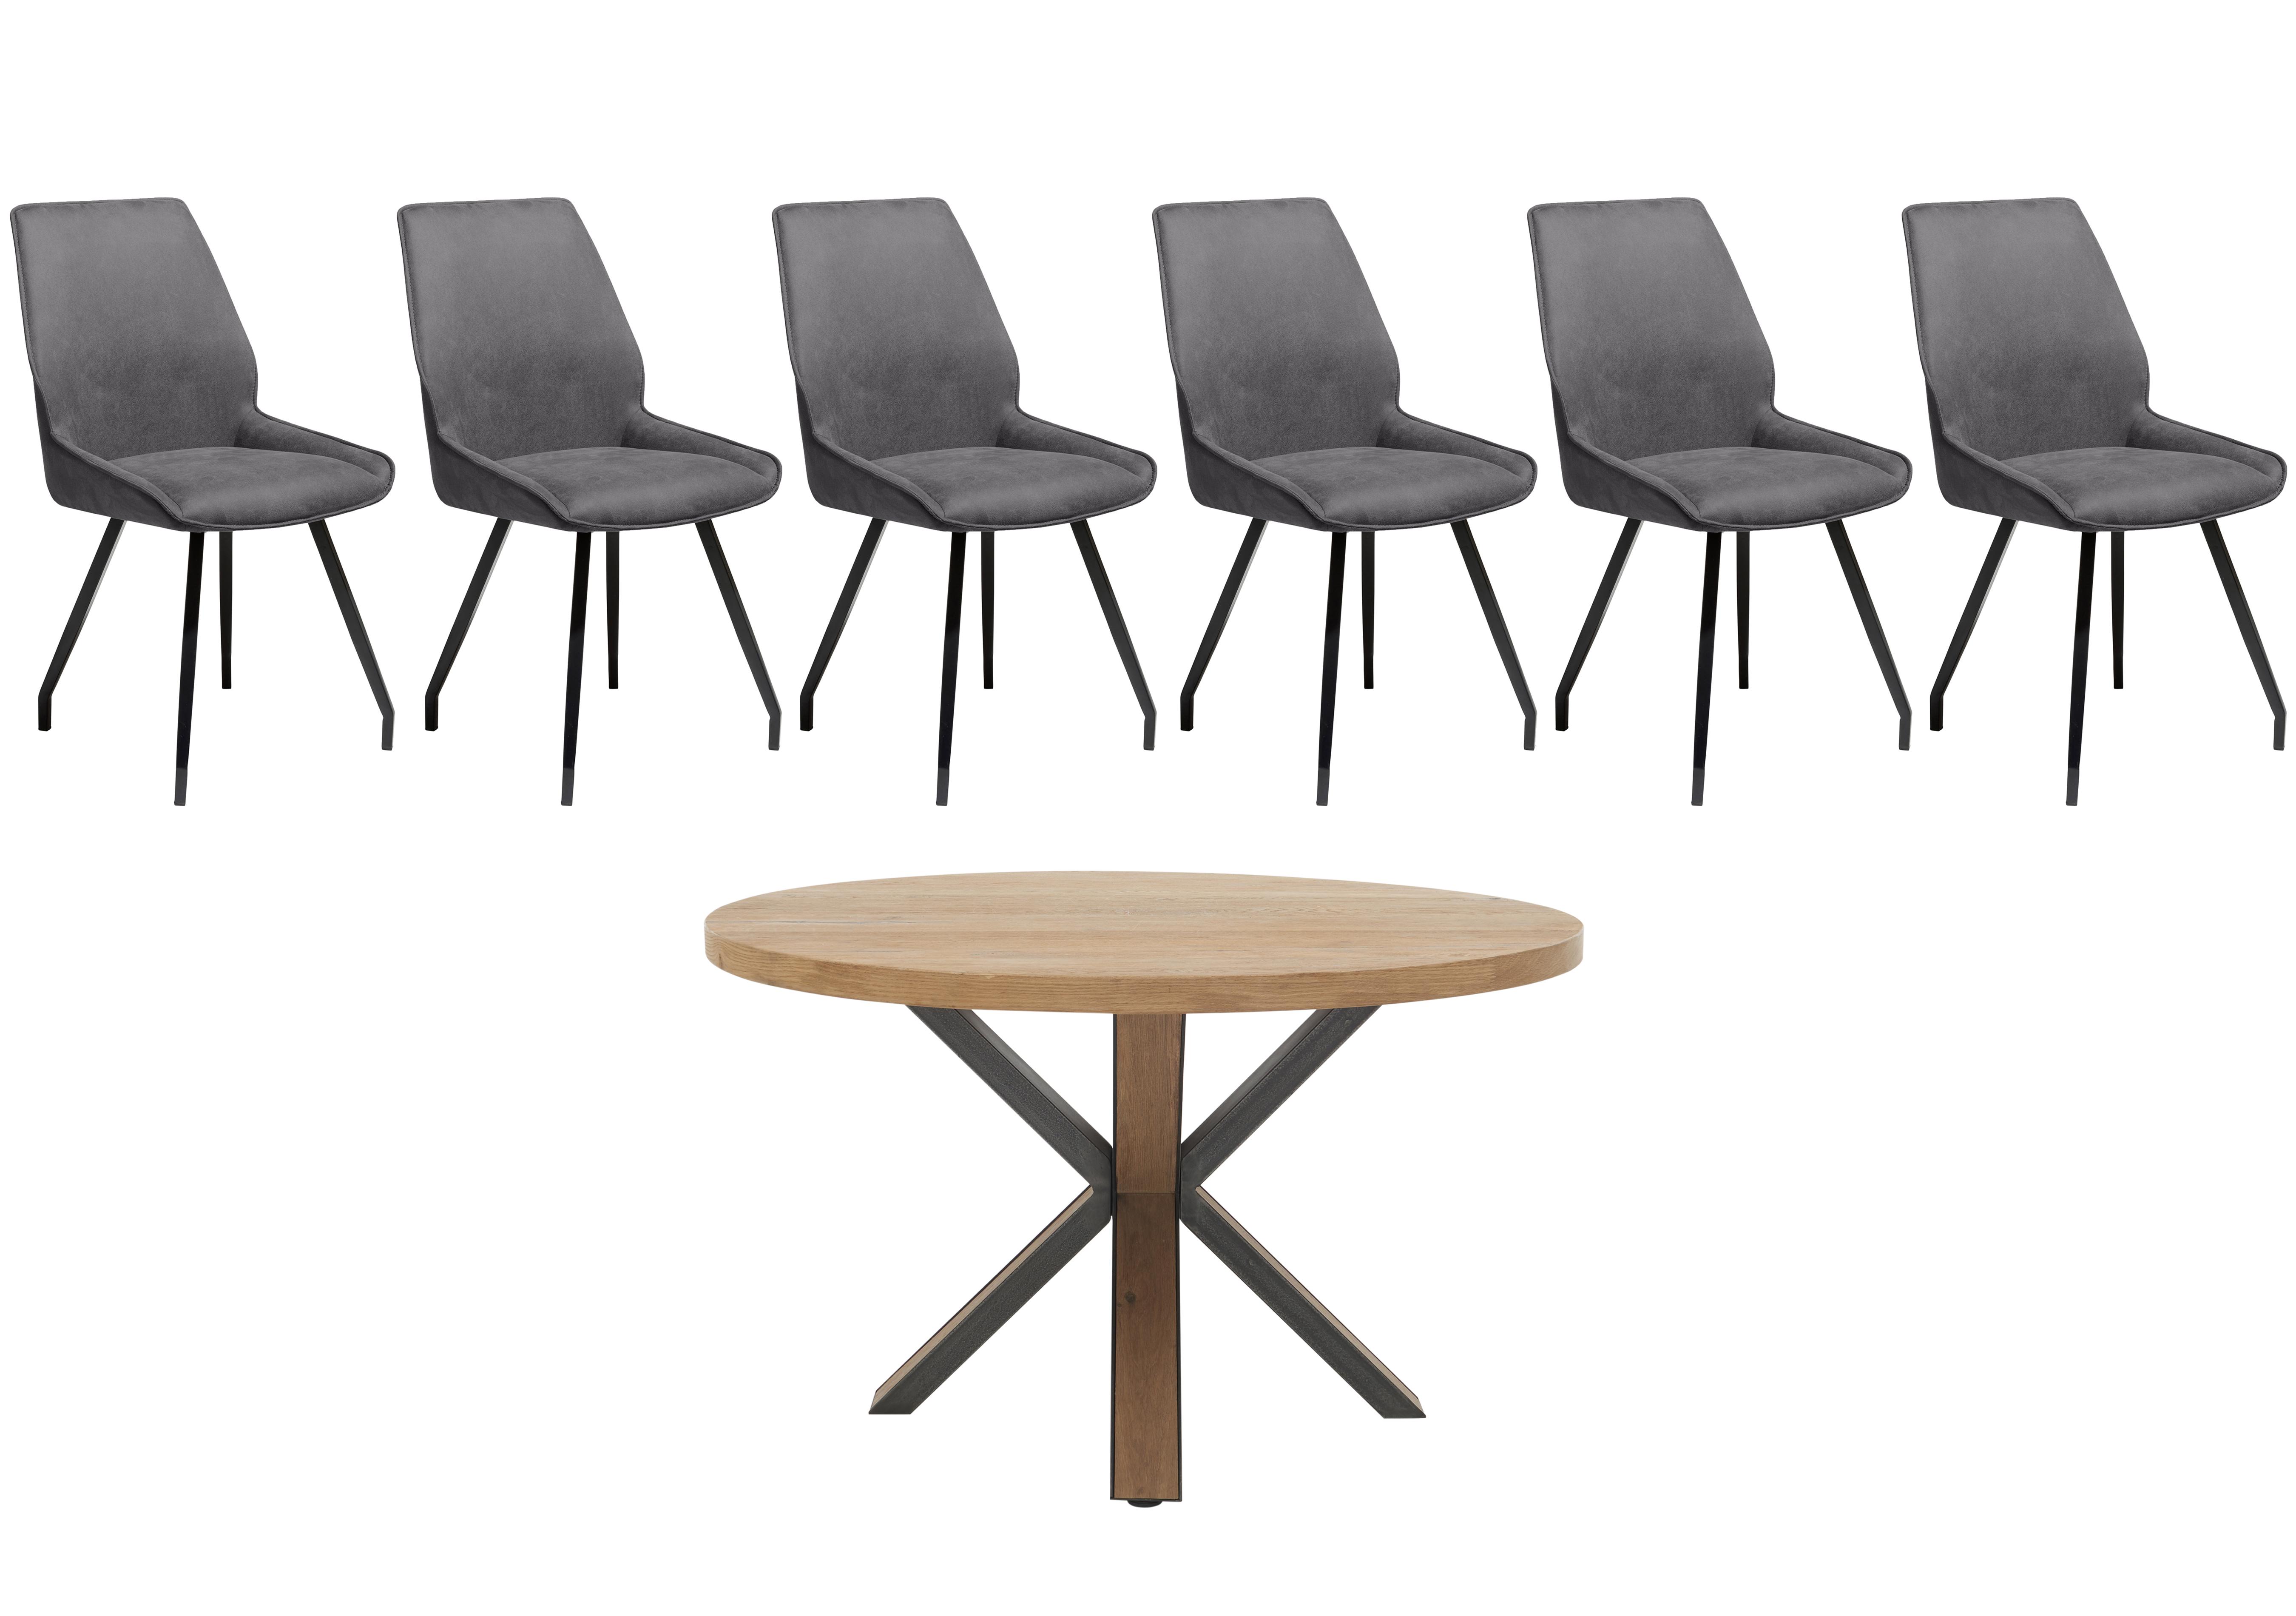 Detroit Starburst Leg Round Dining Table and 6 Scott Dining Chairs in Anthracite on Furniture Village